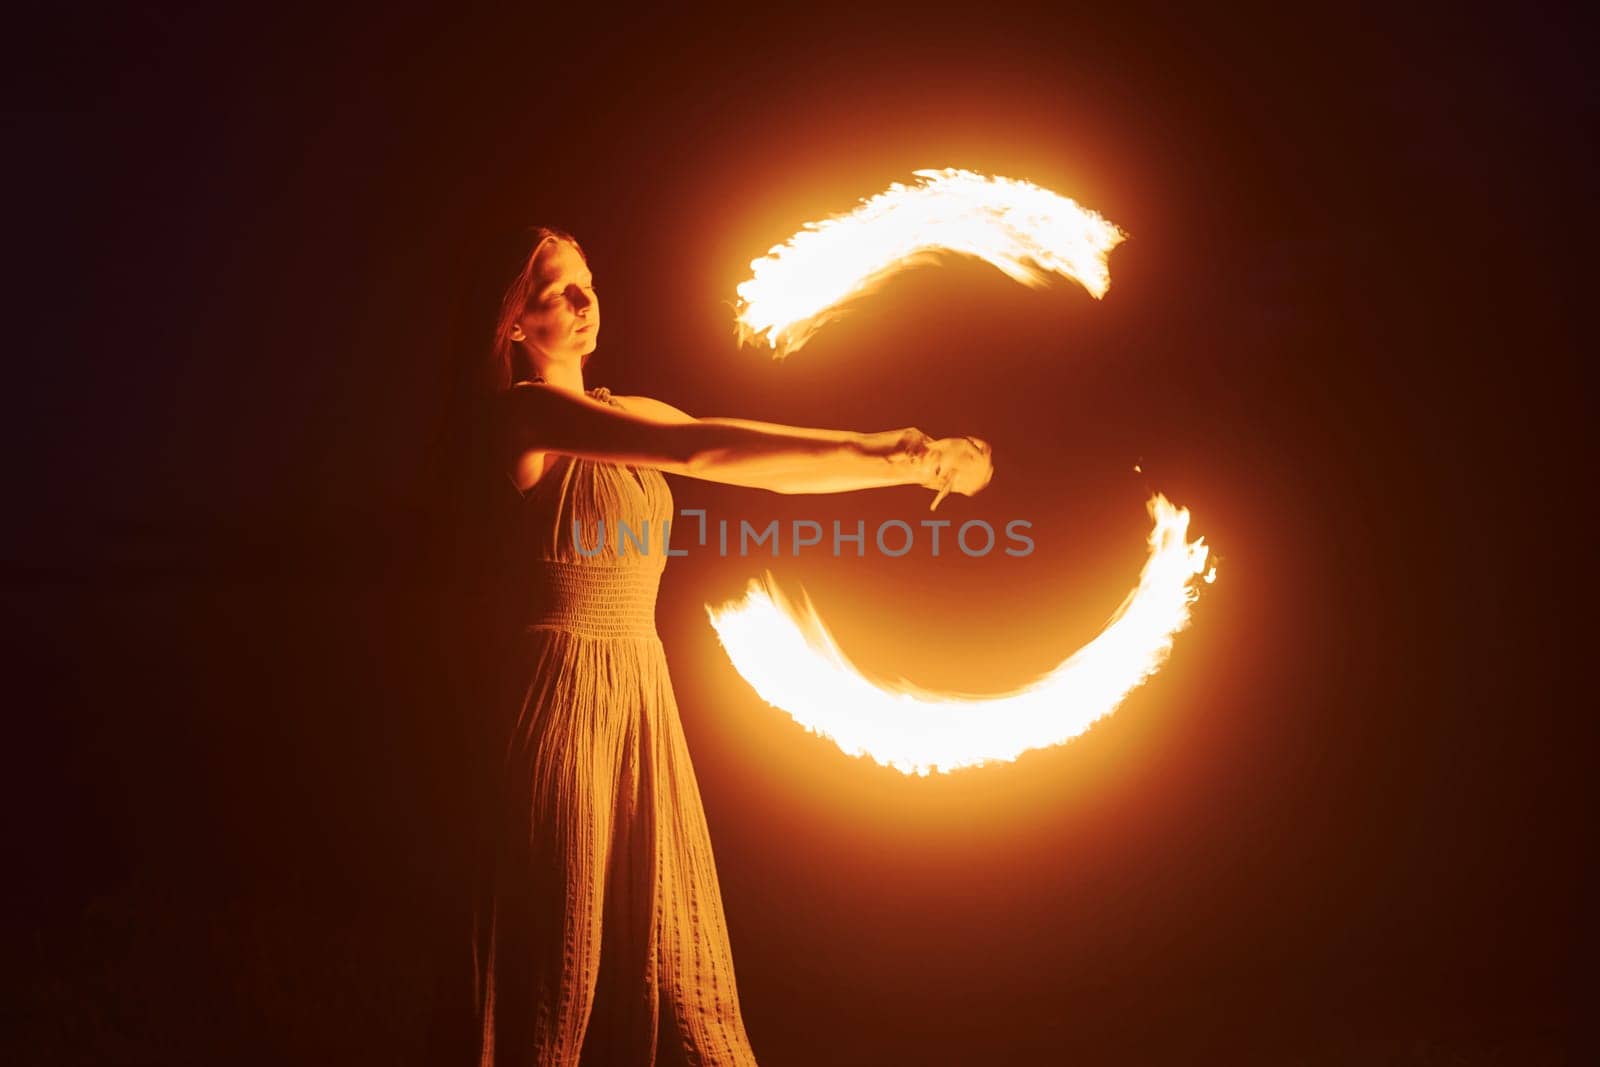 Photo with a long exposure. Fire show by woman in dress in night Carphatian mountains. Beautiful landscape.